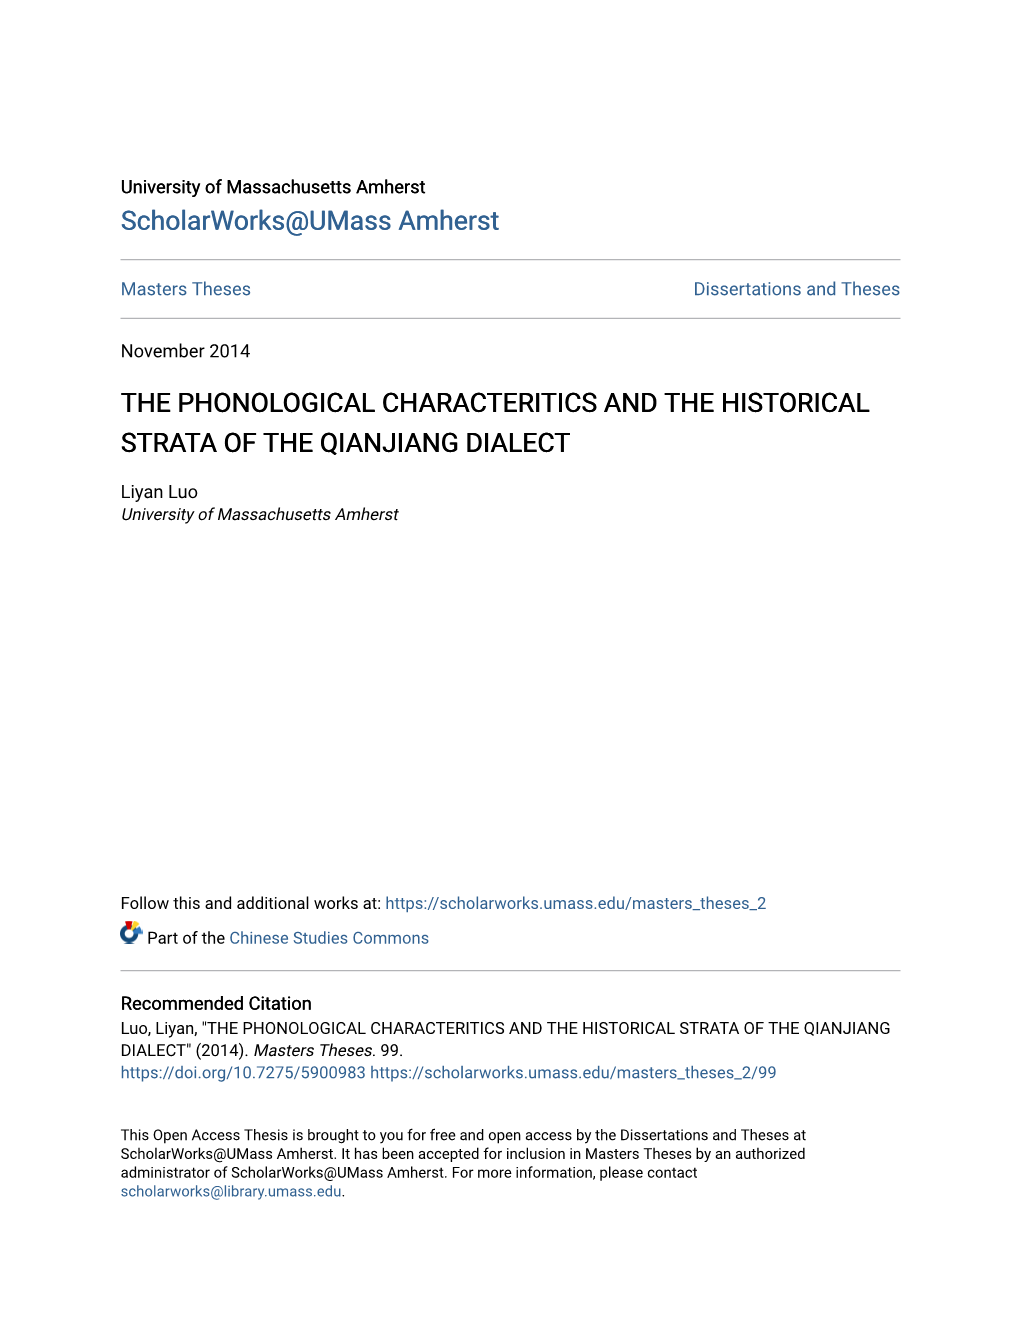 The Phonological Characteritics and the Historical Strata of the Qianjiang Dialect